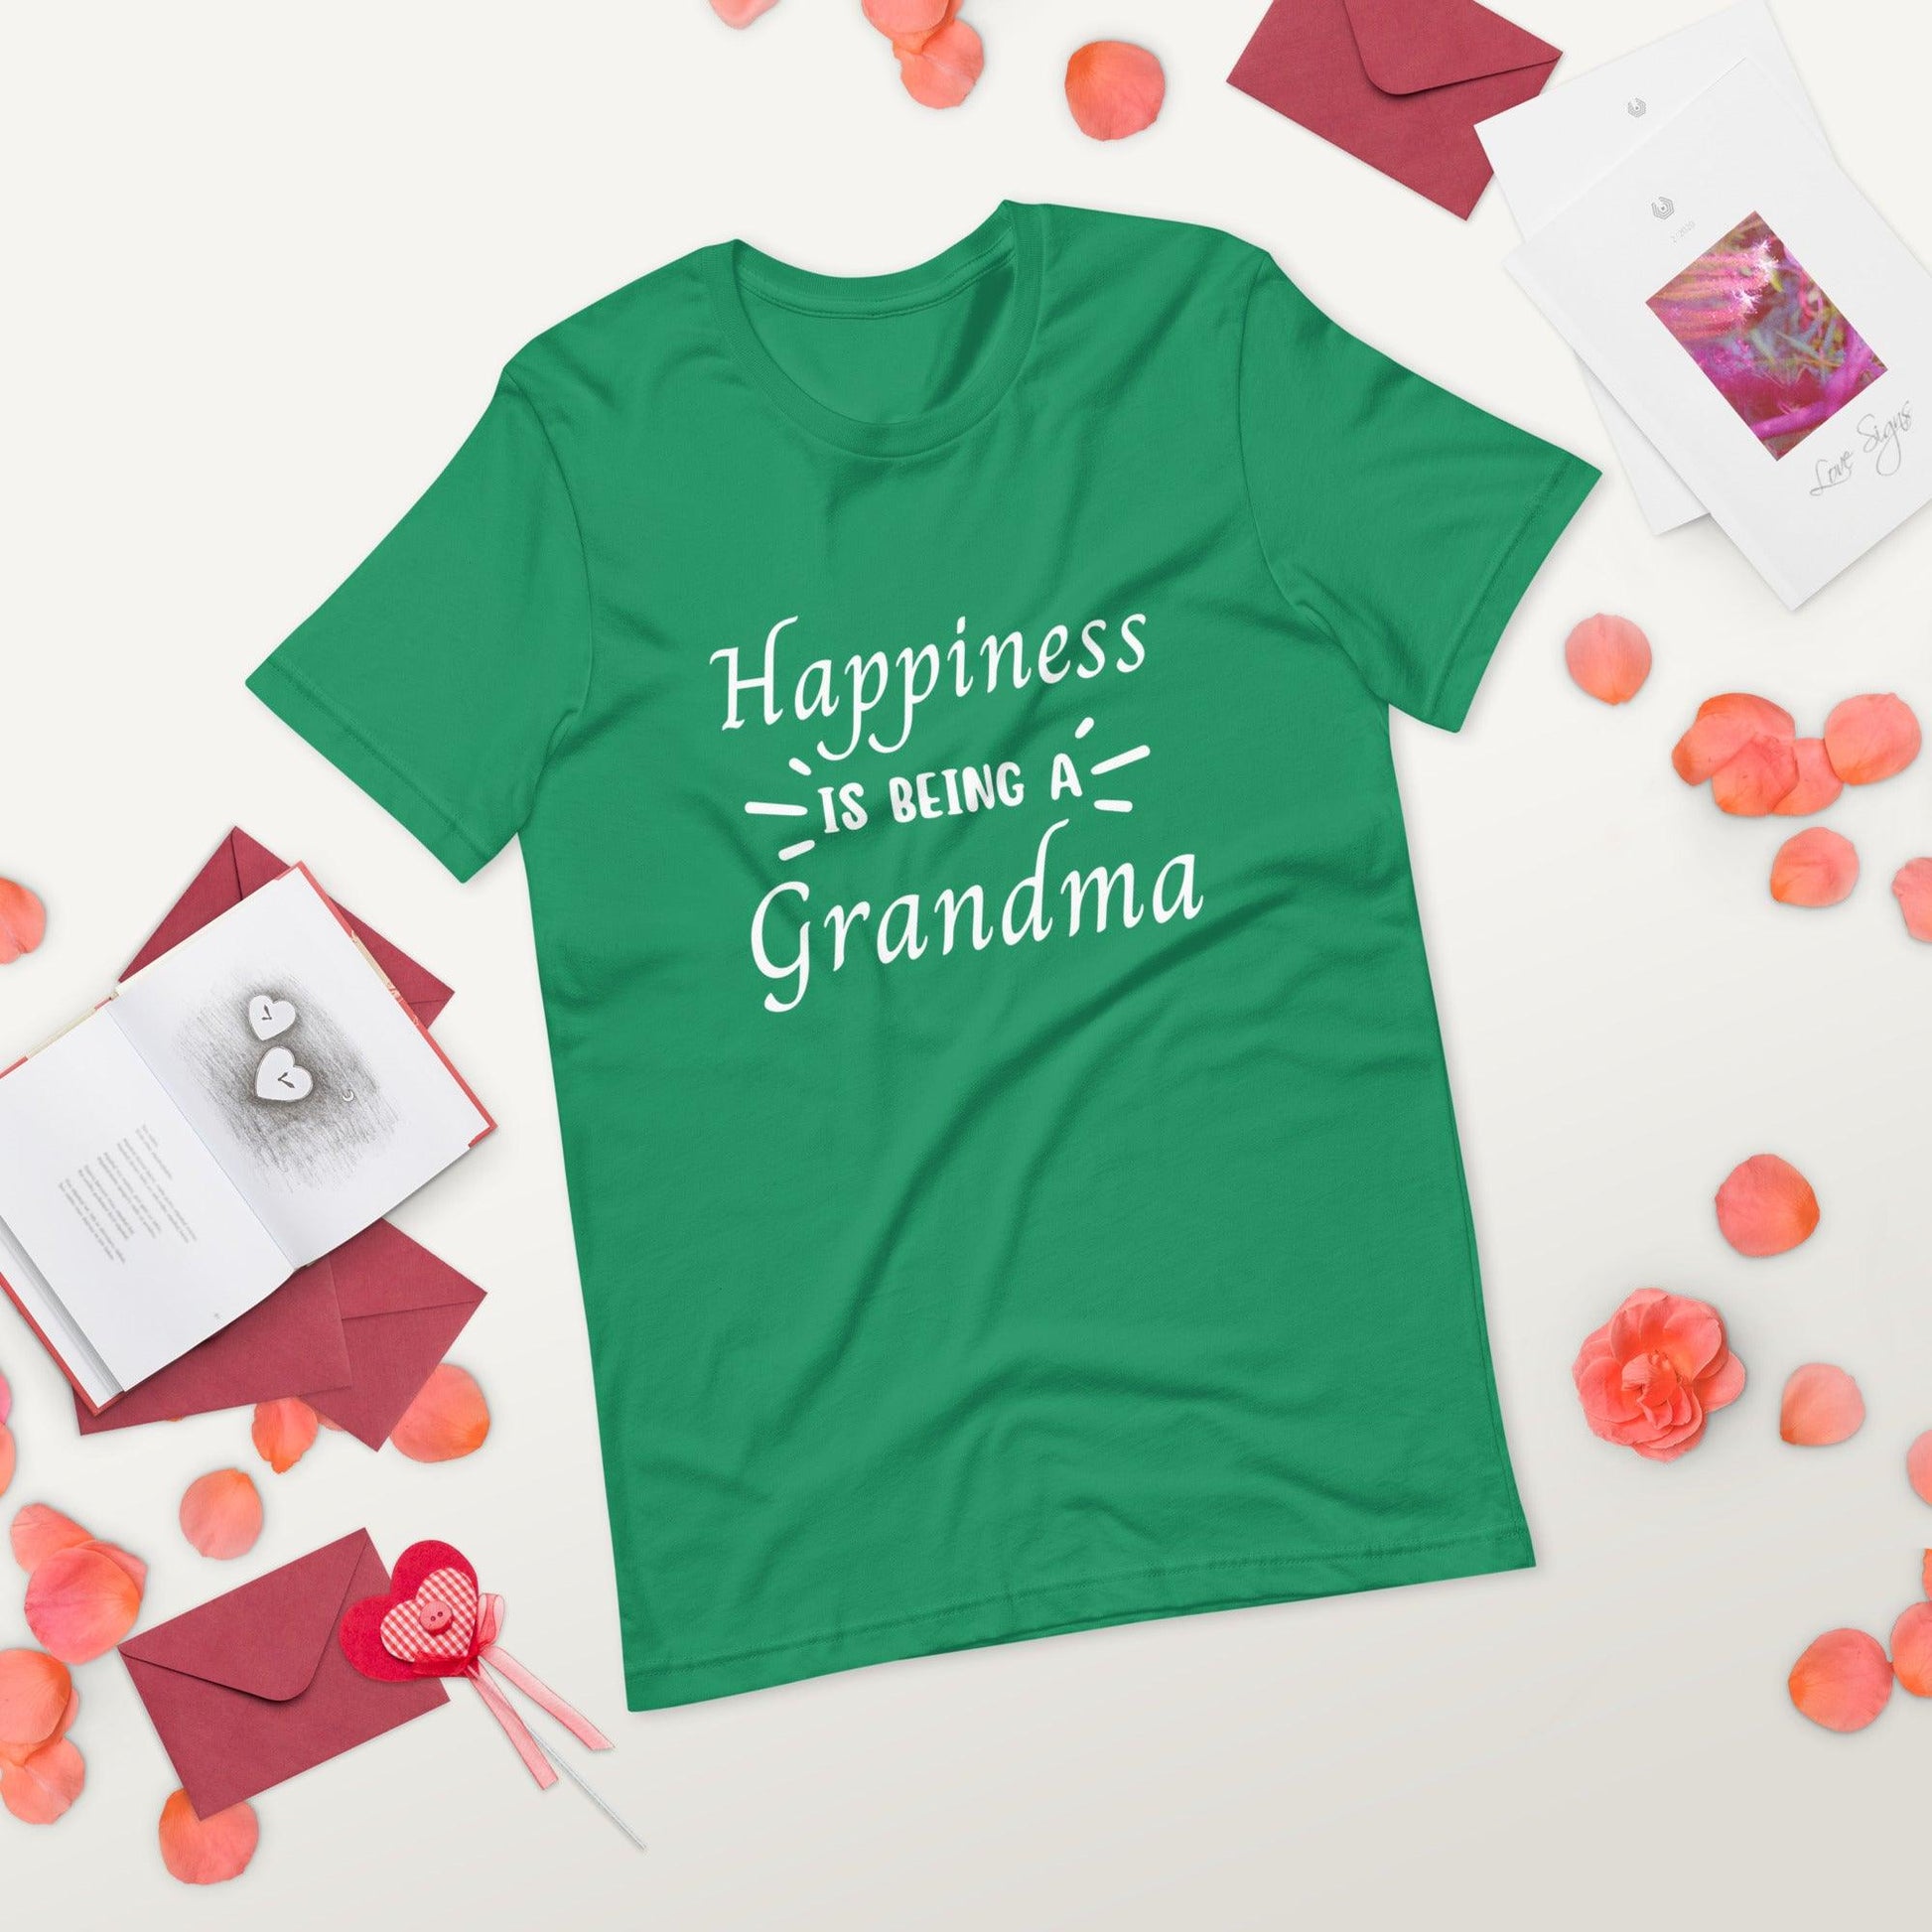 Happiness Is Being A Grandma Unisex T-Shirt - TheGivenGet